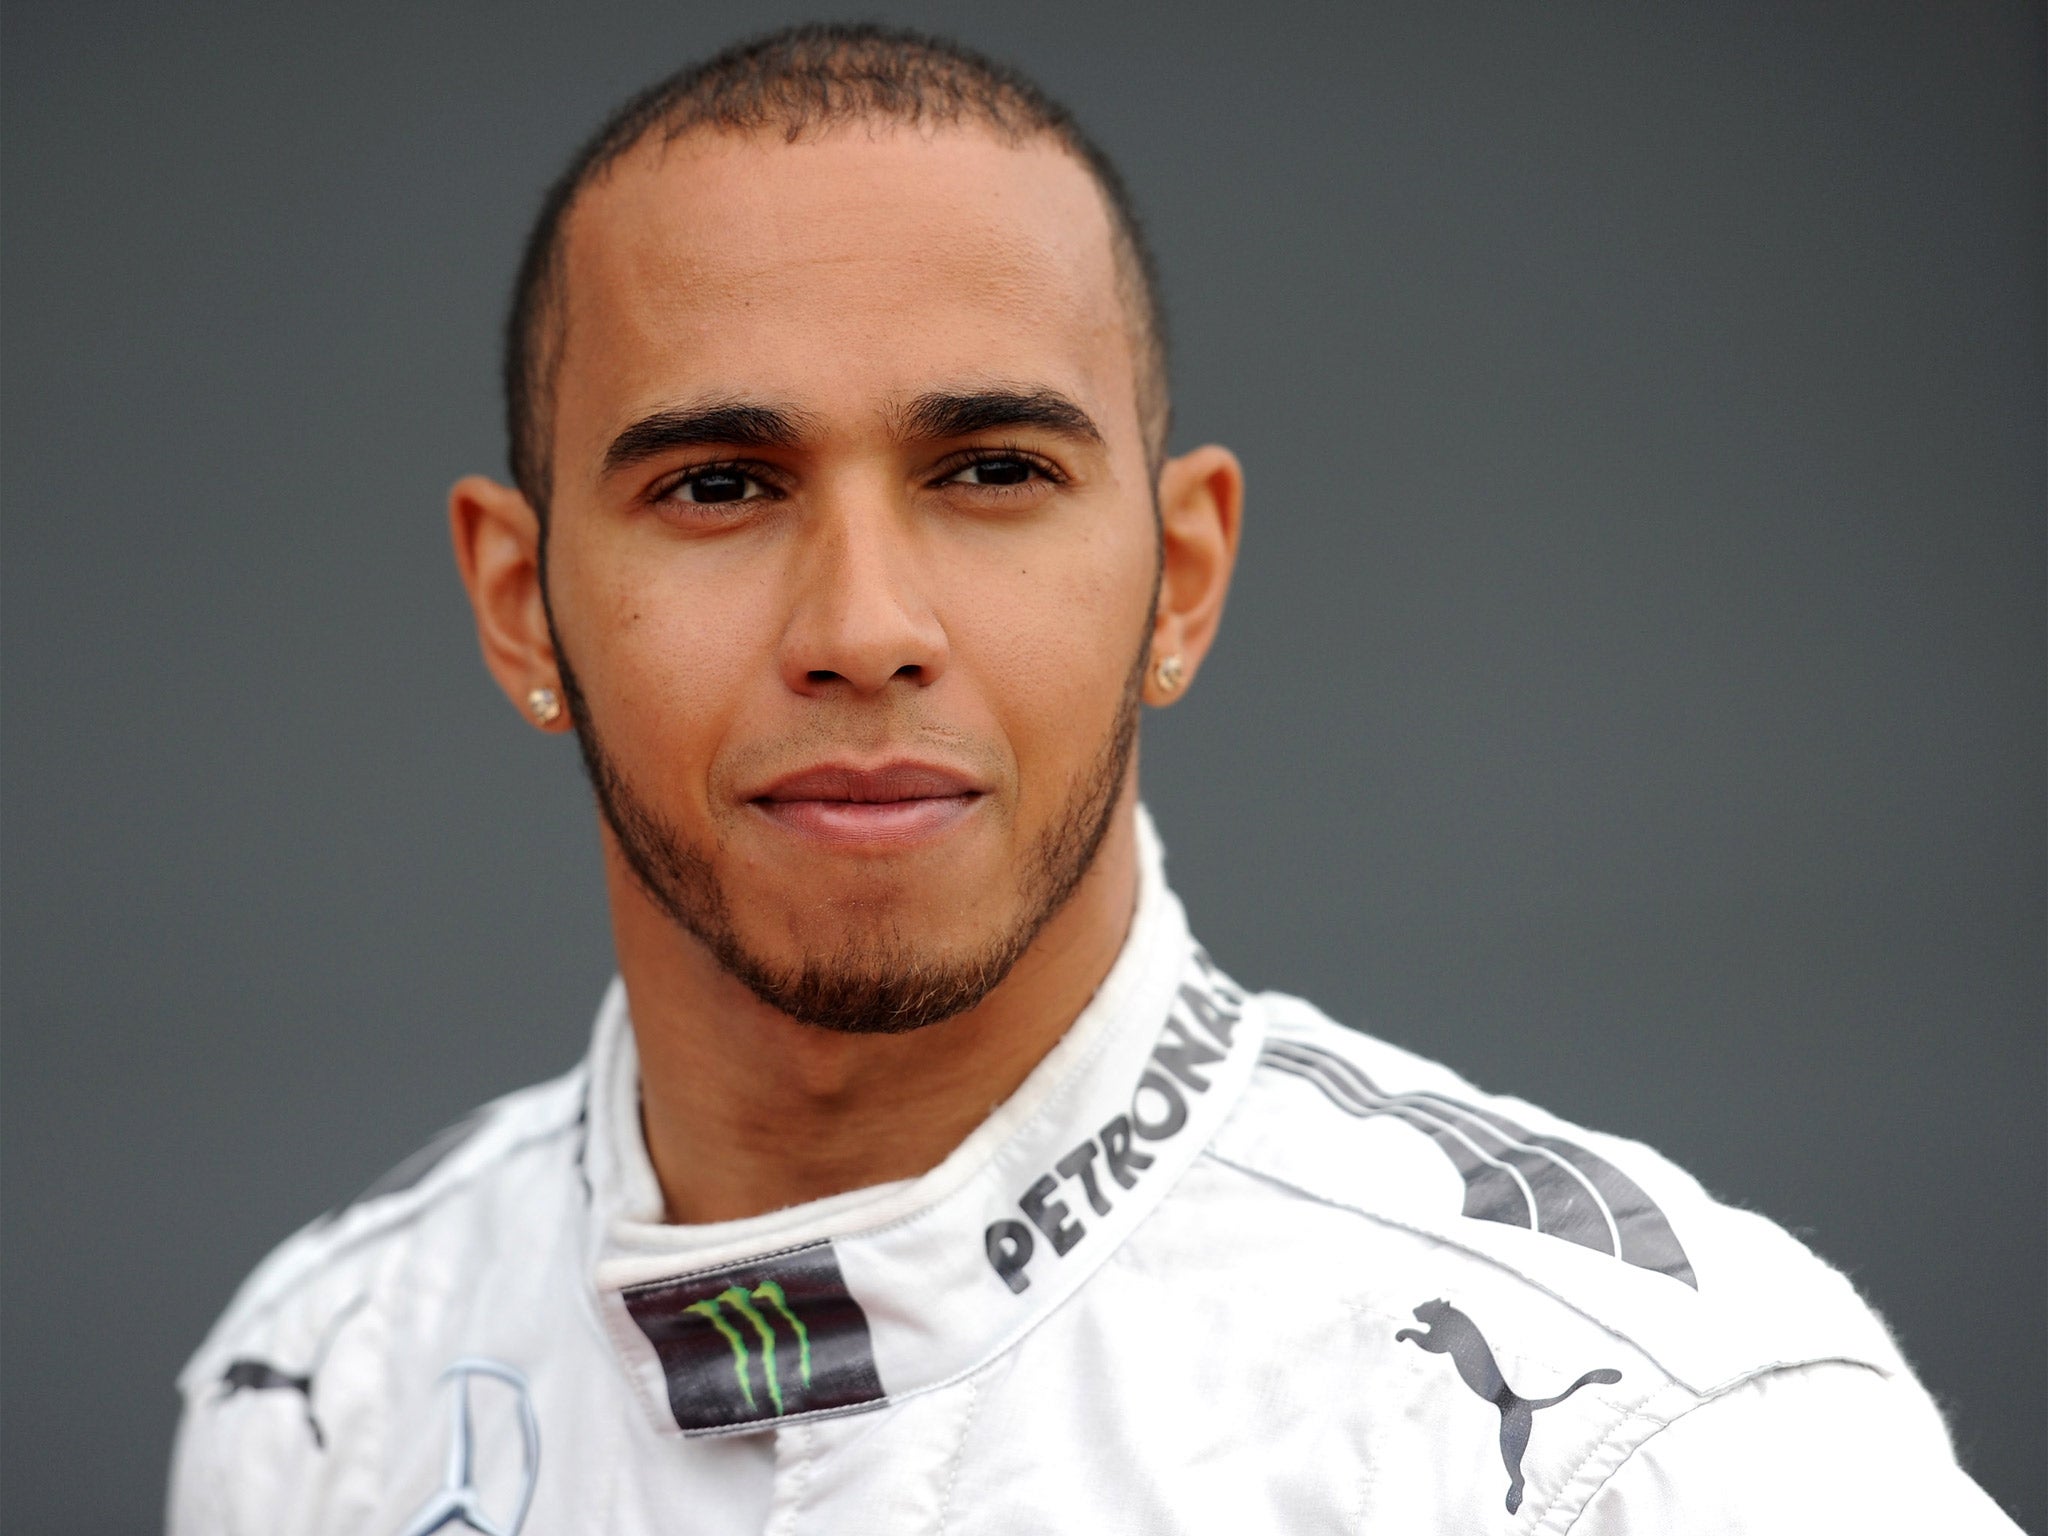 Hamilton has won the Canadian Grand Prix twice in the last three years, with McLaren